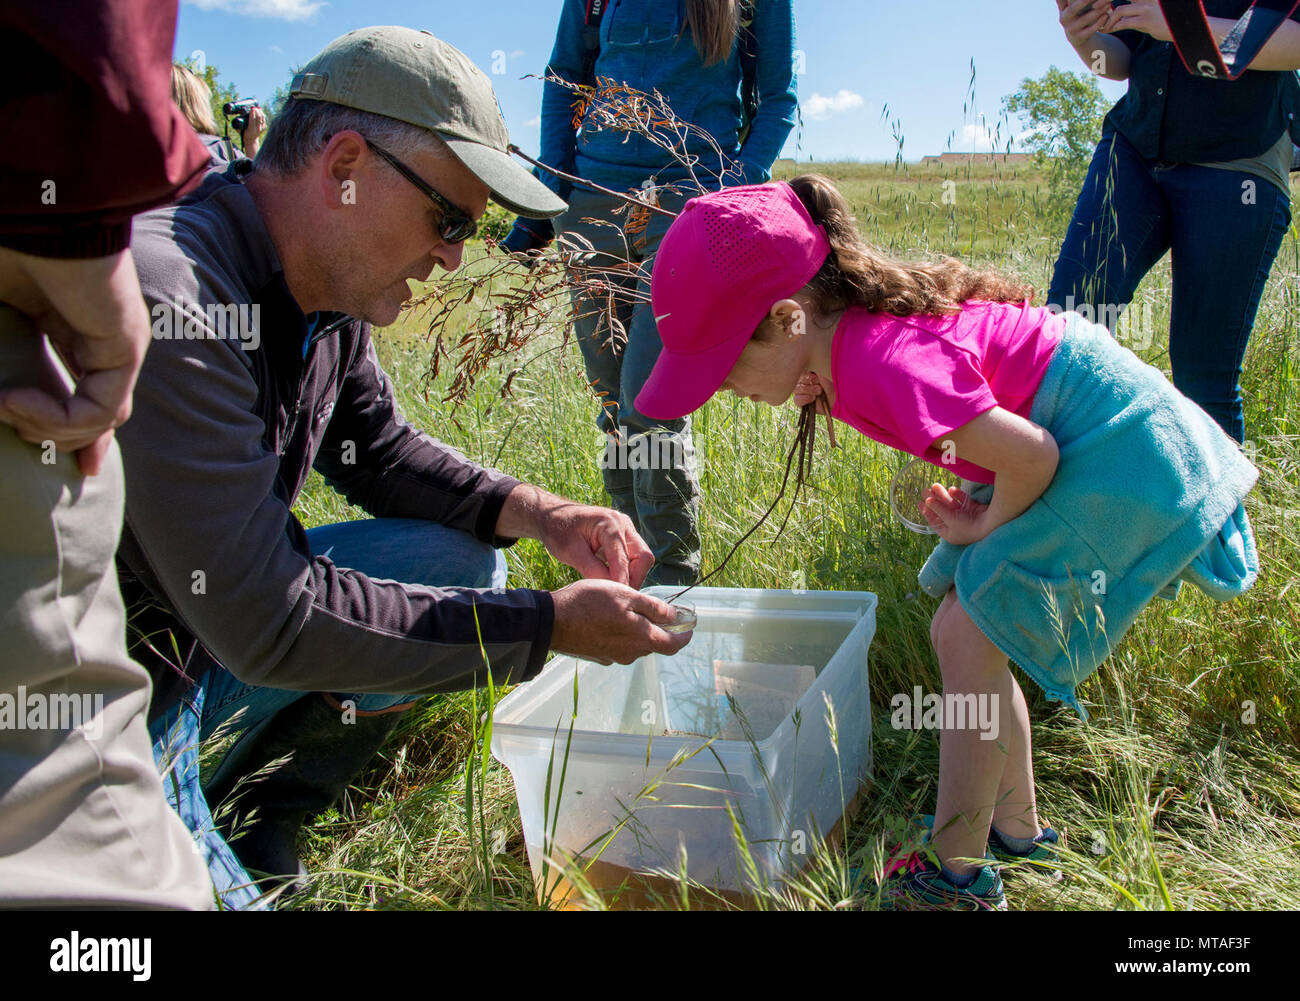 Matthew Wacker (left), associate ecologist consultant from H. T. Harvey and Associates, shows a curious onlooker a close up view of creatures found vernal pool ecosystem during the Earth Day Nature Preserve Tour, Apr. 20, 2017. The event showcased the many natural environmental resources available to visit on the base. Stock Photo